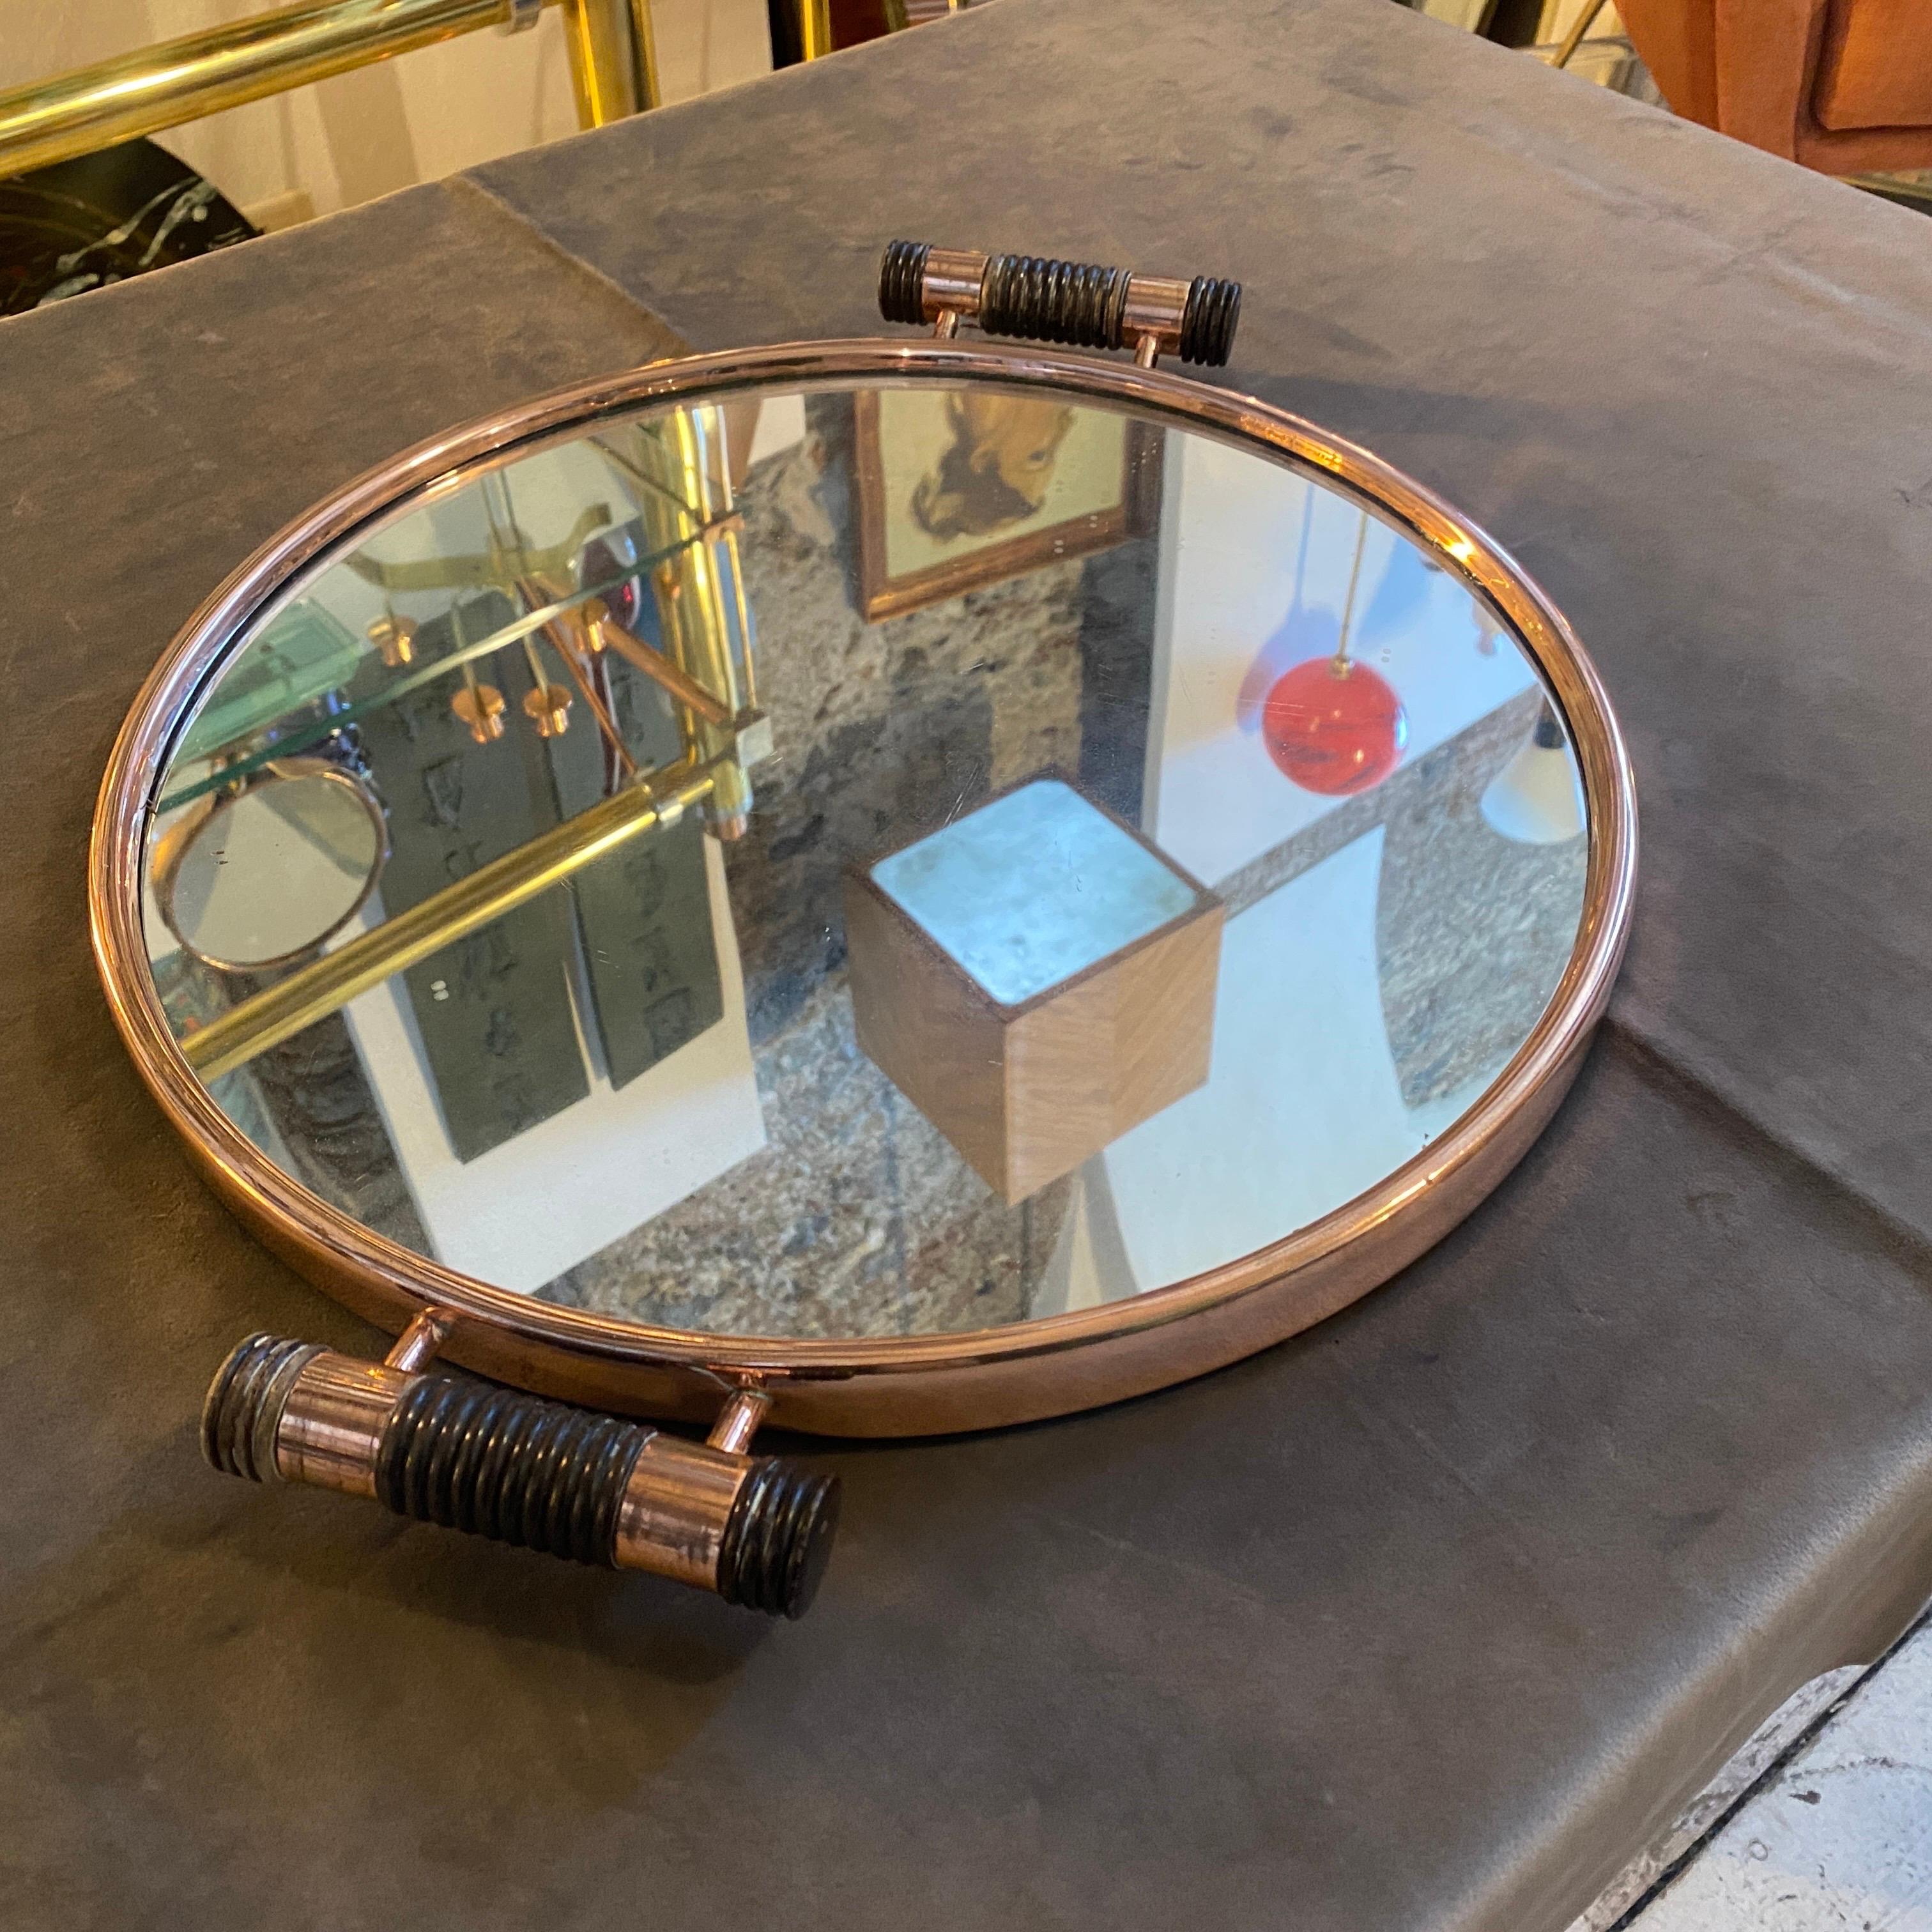 A stylish Art Deco round tray designed and manufactured in Italy in the Thirties. It's in a very good vintage condition. This Italian Art Deco round tray made of copper, mirror glass, and ebony handles is labeld on the bottom with original label of